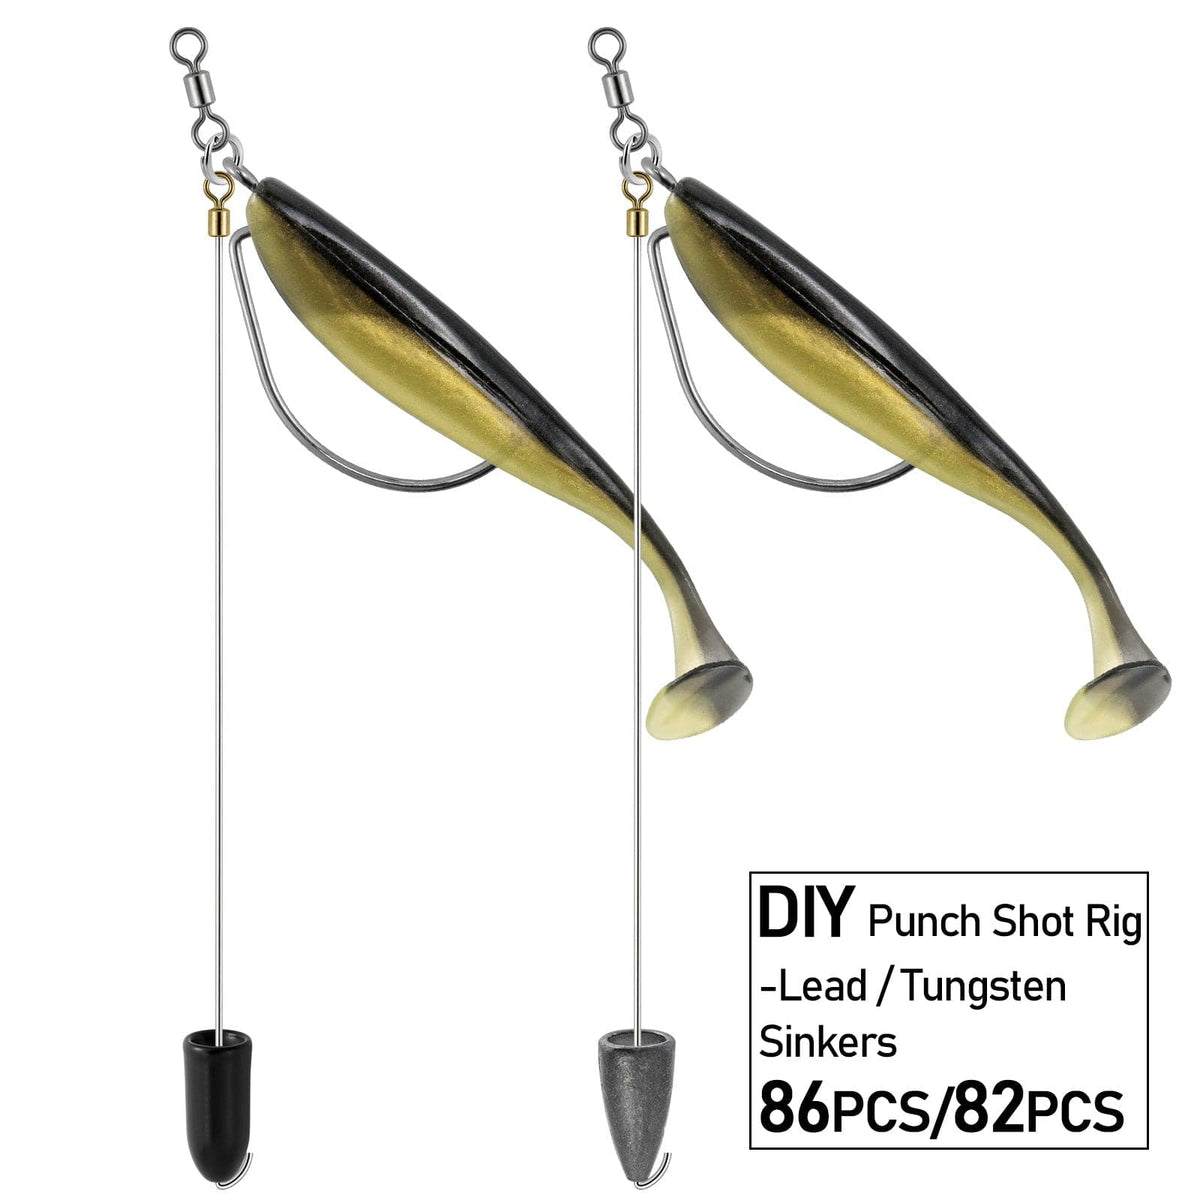 Harmony Fishing - Punch Shot Rig Kit (4/0 EWG Hooks) [Interchangeable Hook  Leadered Punchshot Rig] – Tokyo Style Punch Shot Rig/Jig for Bass Fishing